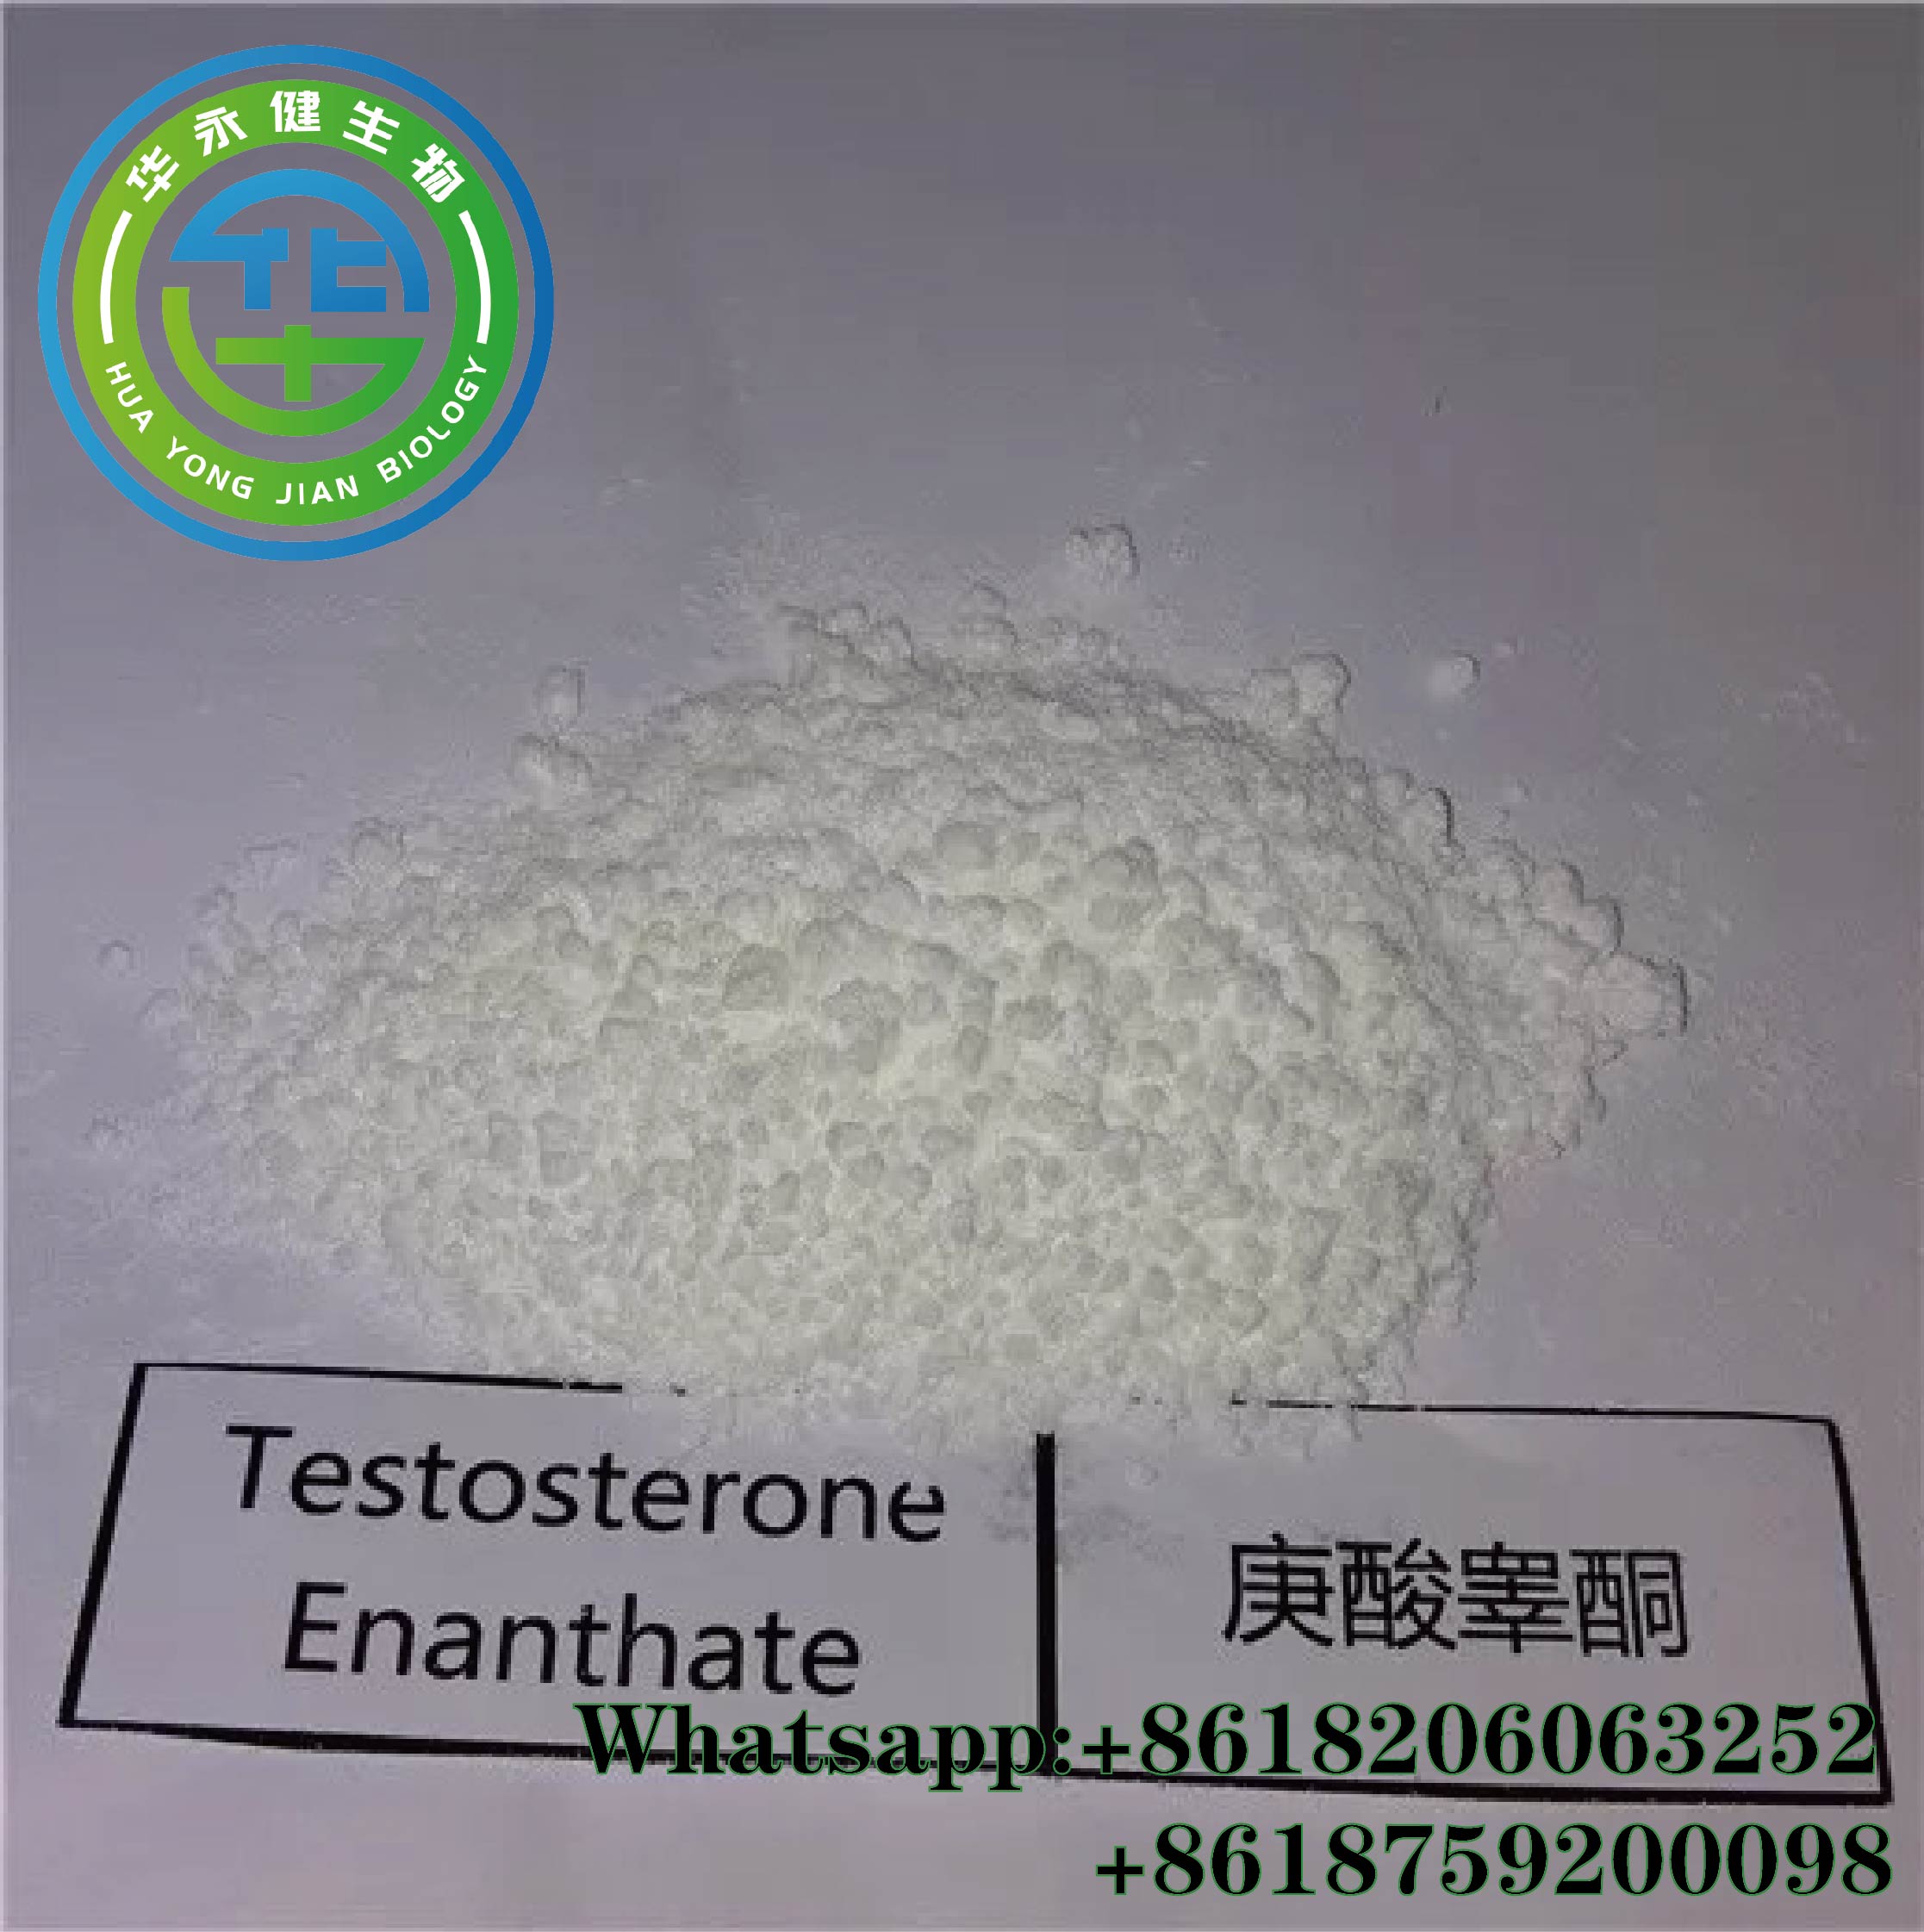 Injectable Testosterone Enanthate/Test Enanthate raw steroid powder for Muscle Building CAS 315-37-7